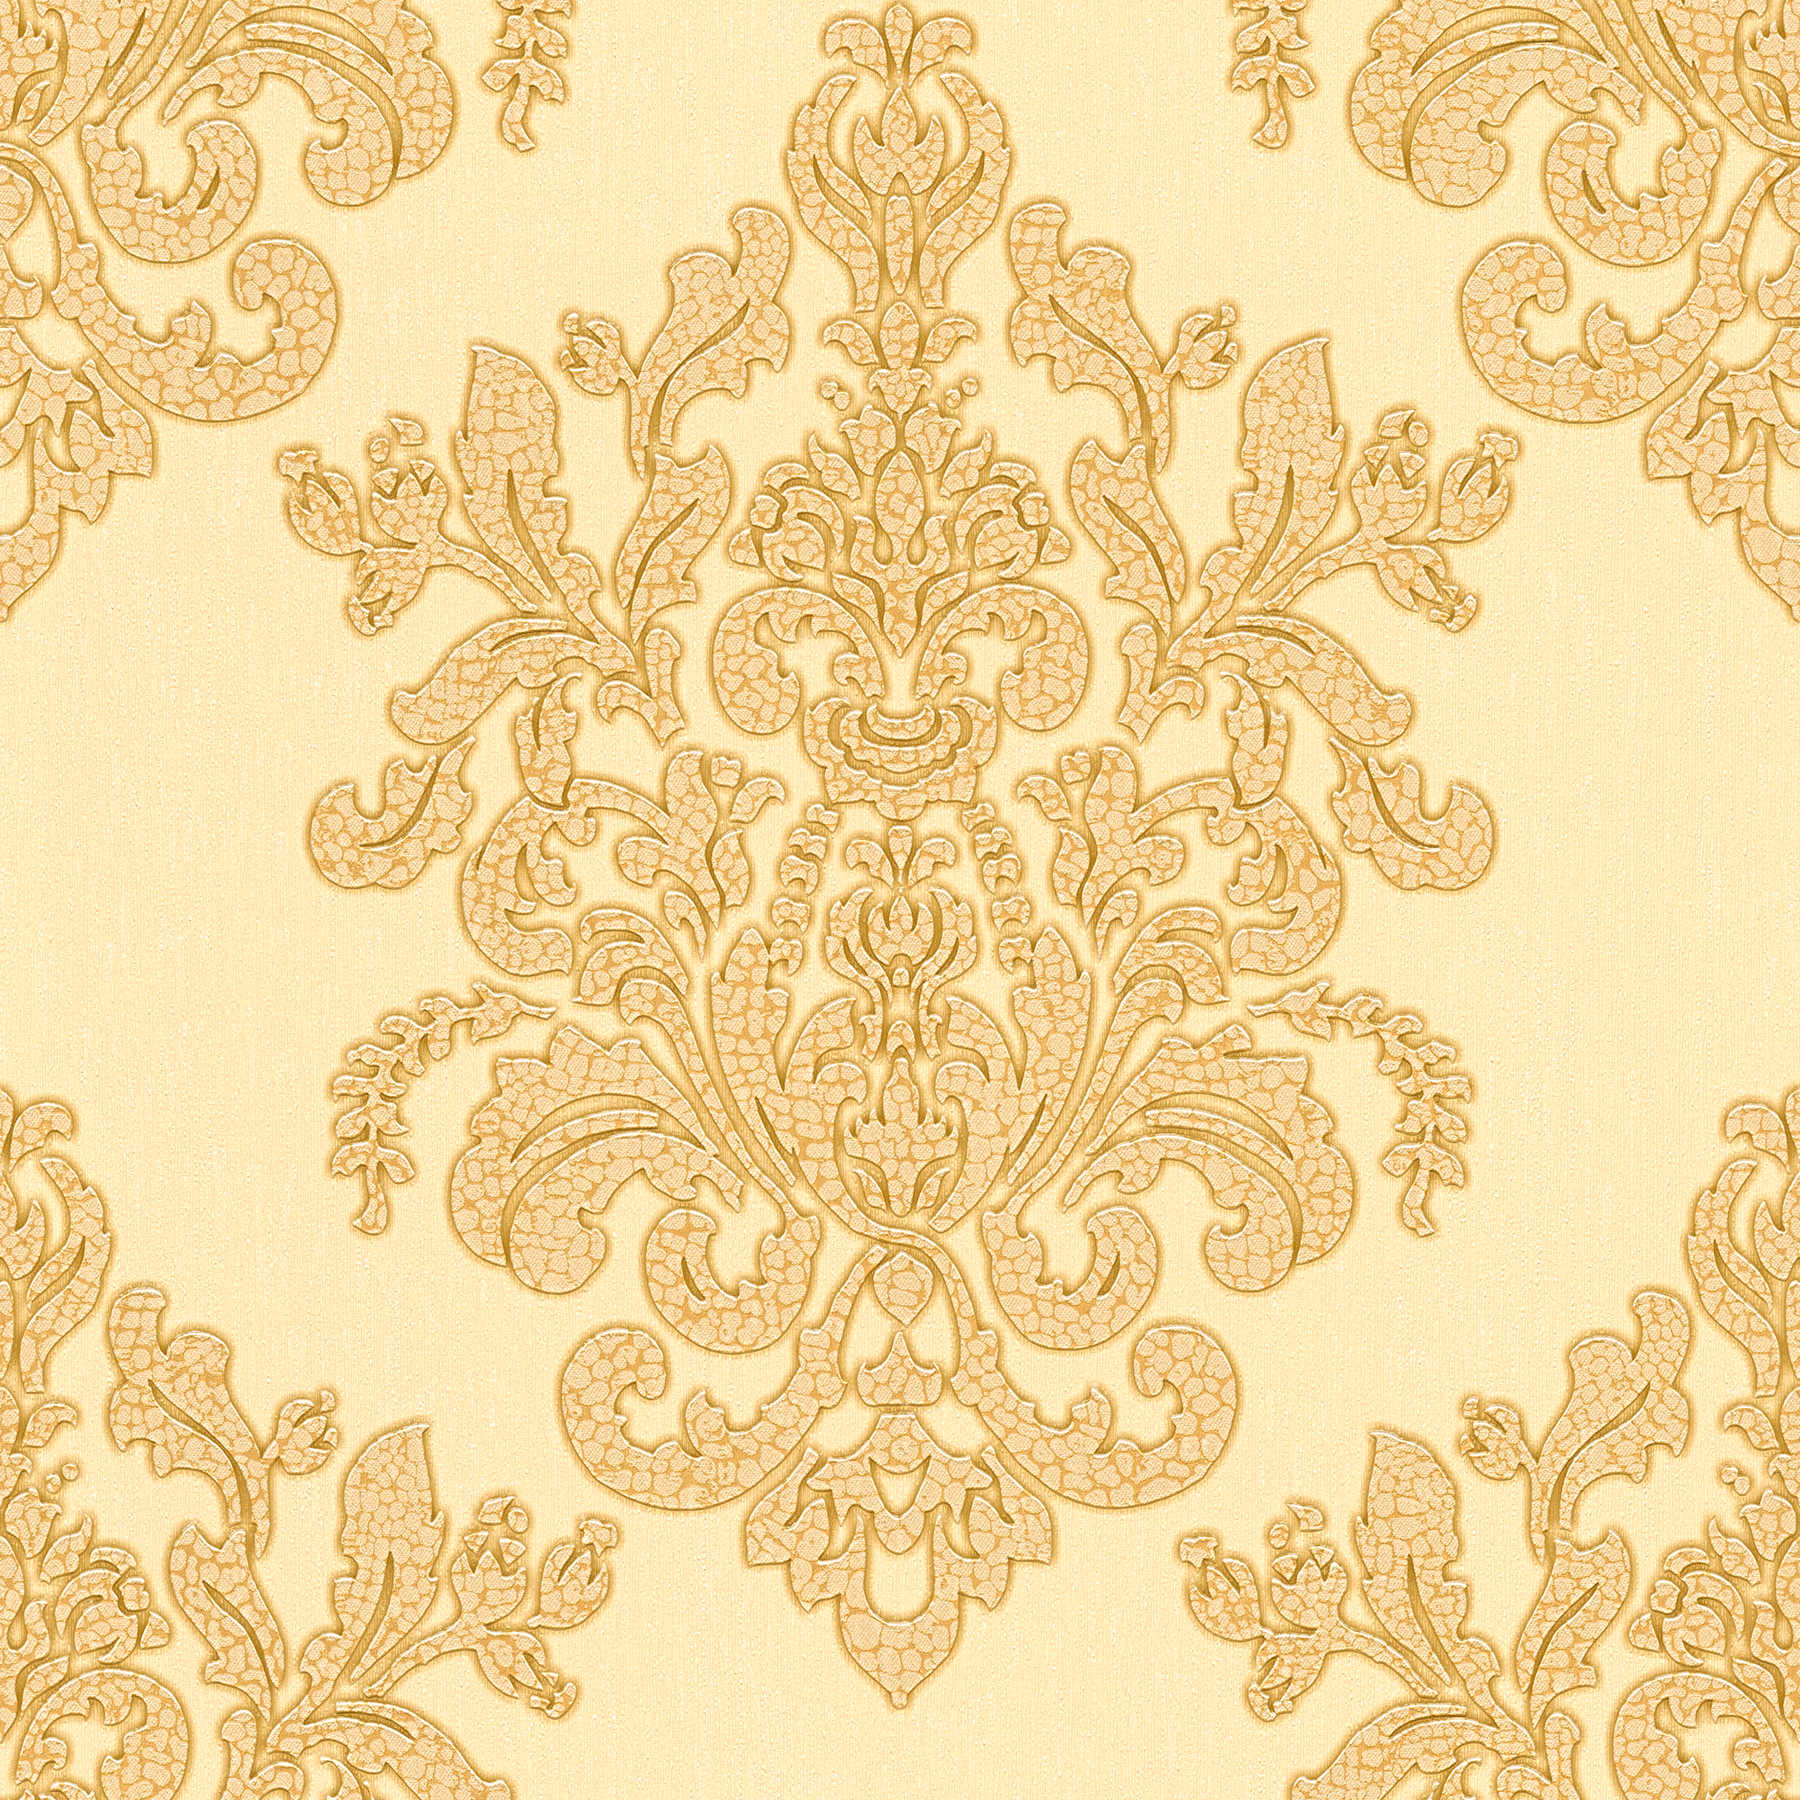 Ornament non-woven wallpaper gold with crackle effect - metallic
